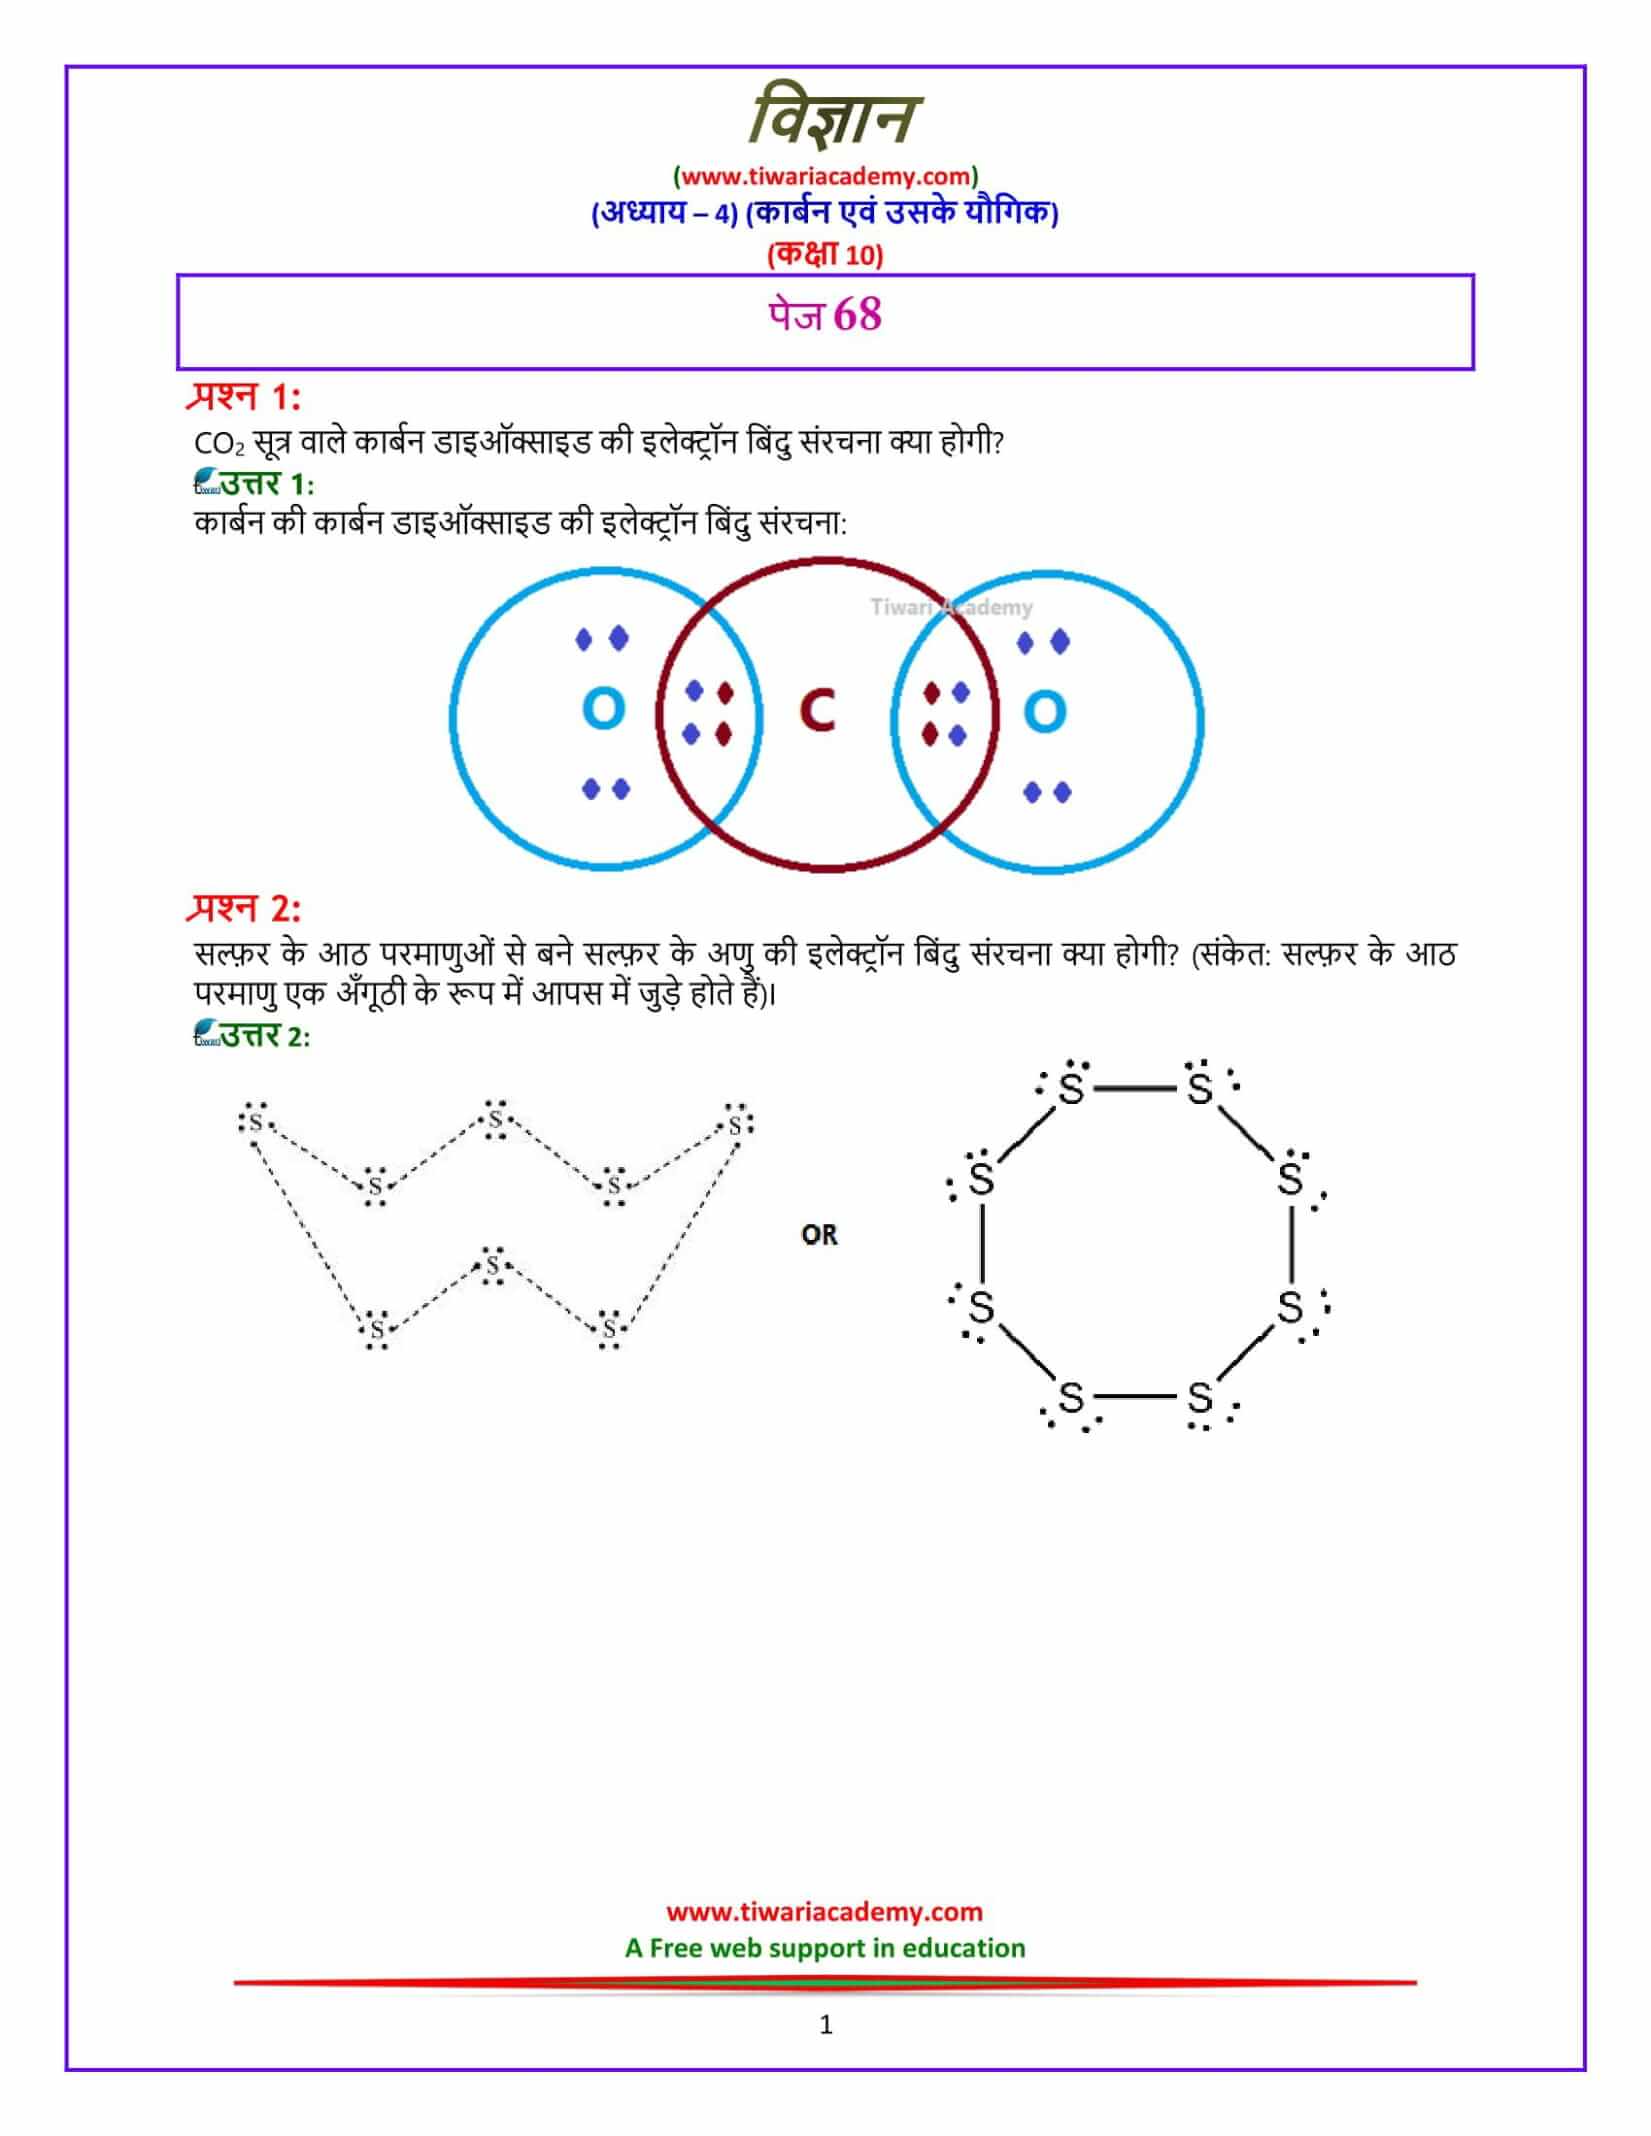 NCERT Solutions for Class 10 Science Chapter 4 page 68 answers